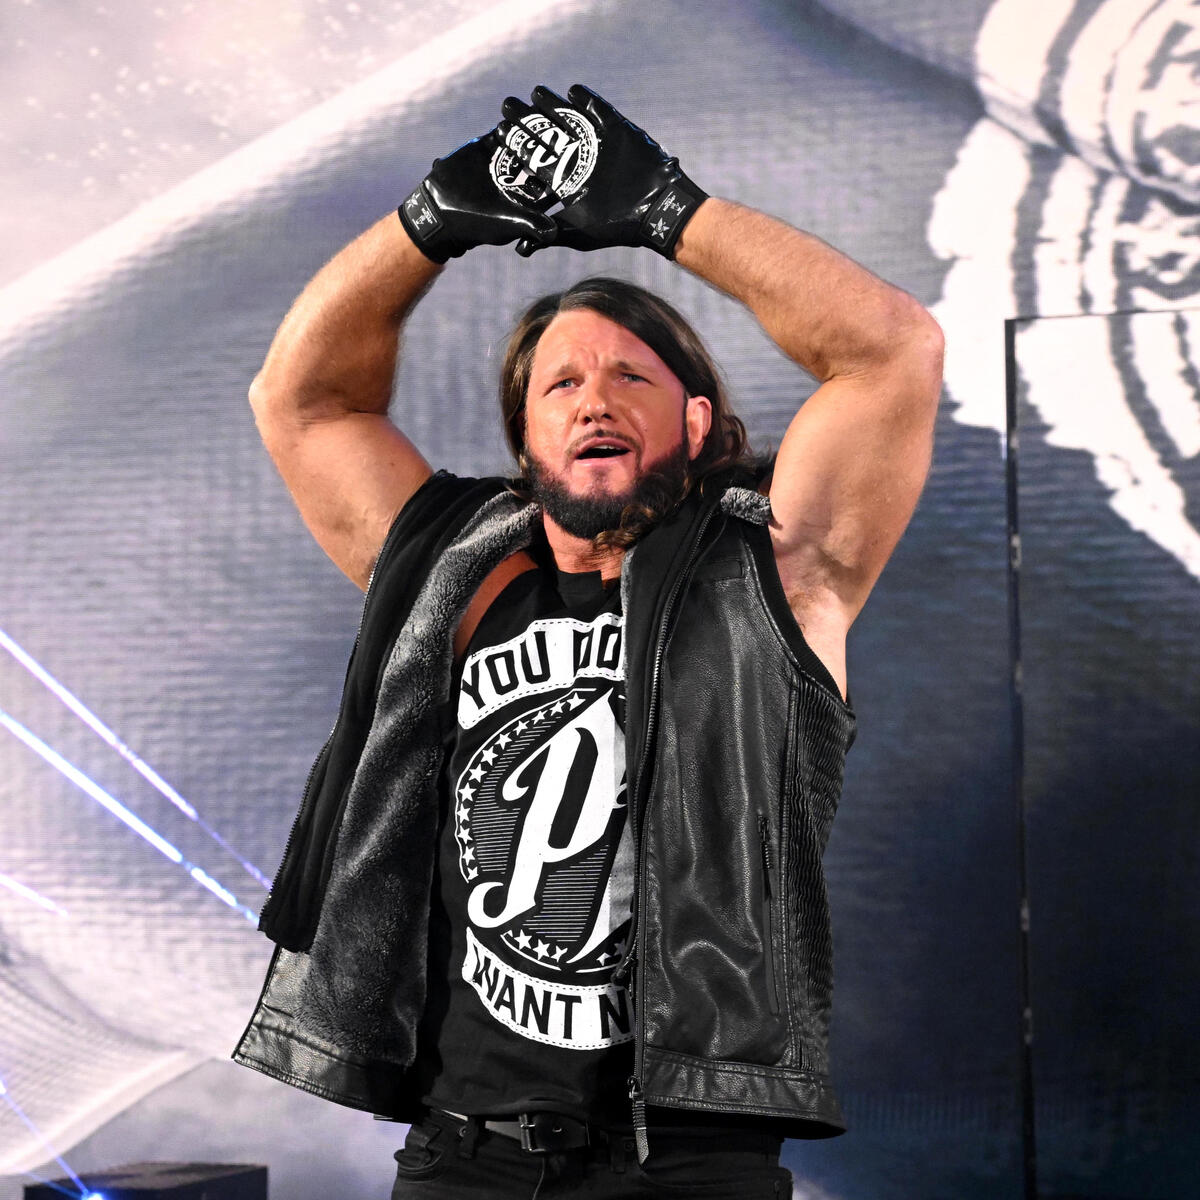 AJ Styles has now had 885 matches in WWE. This is 77 more matches than he had for his entire run in TNA.